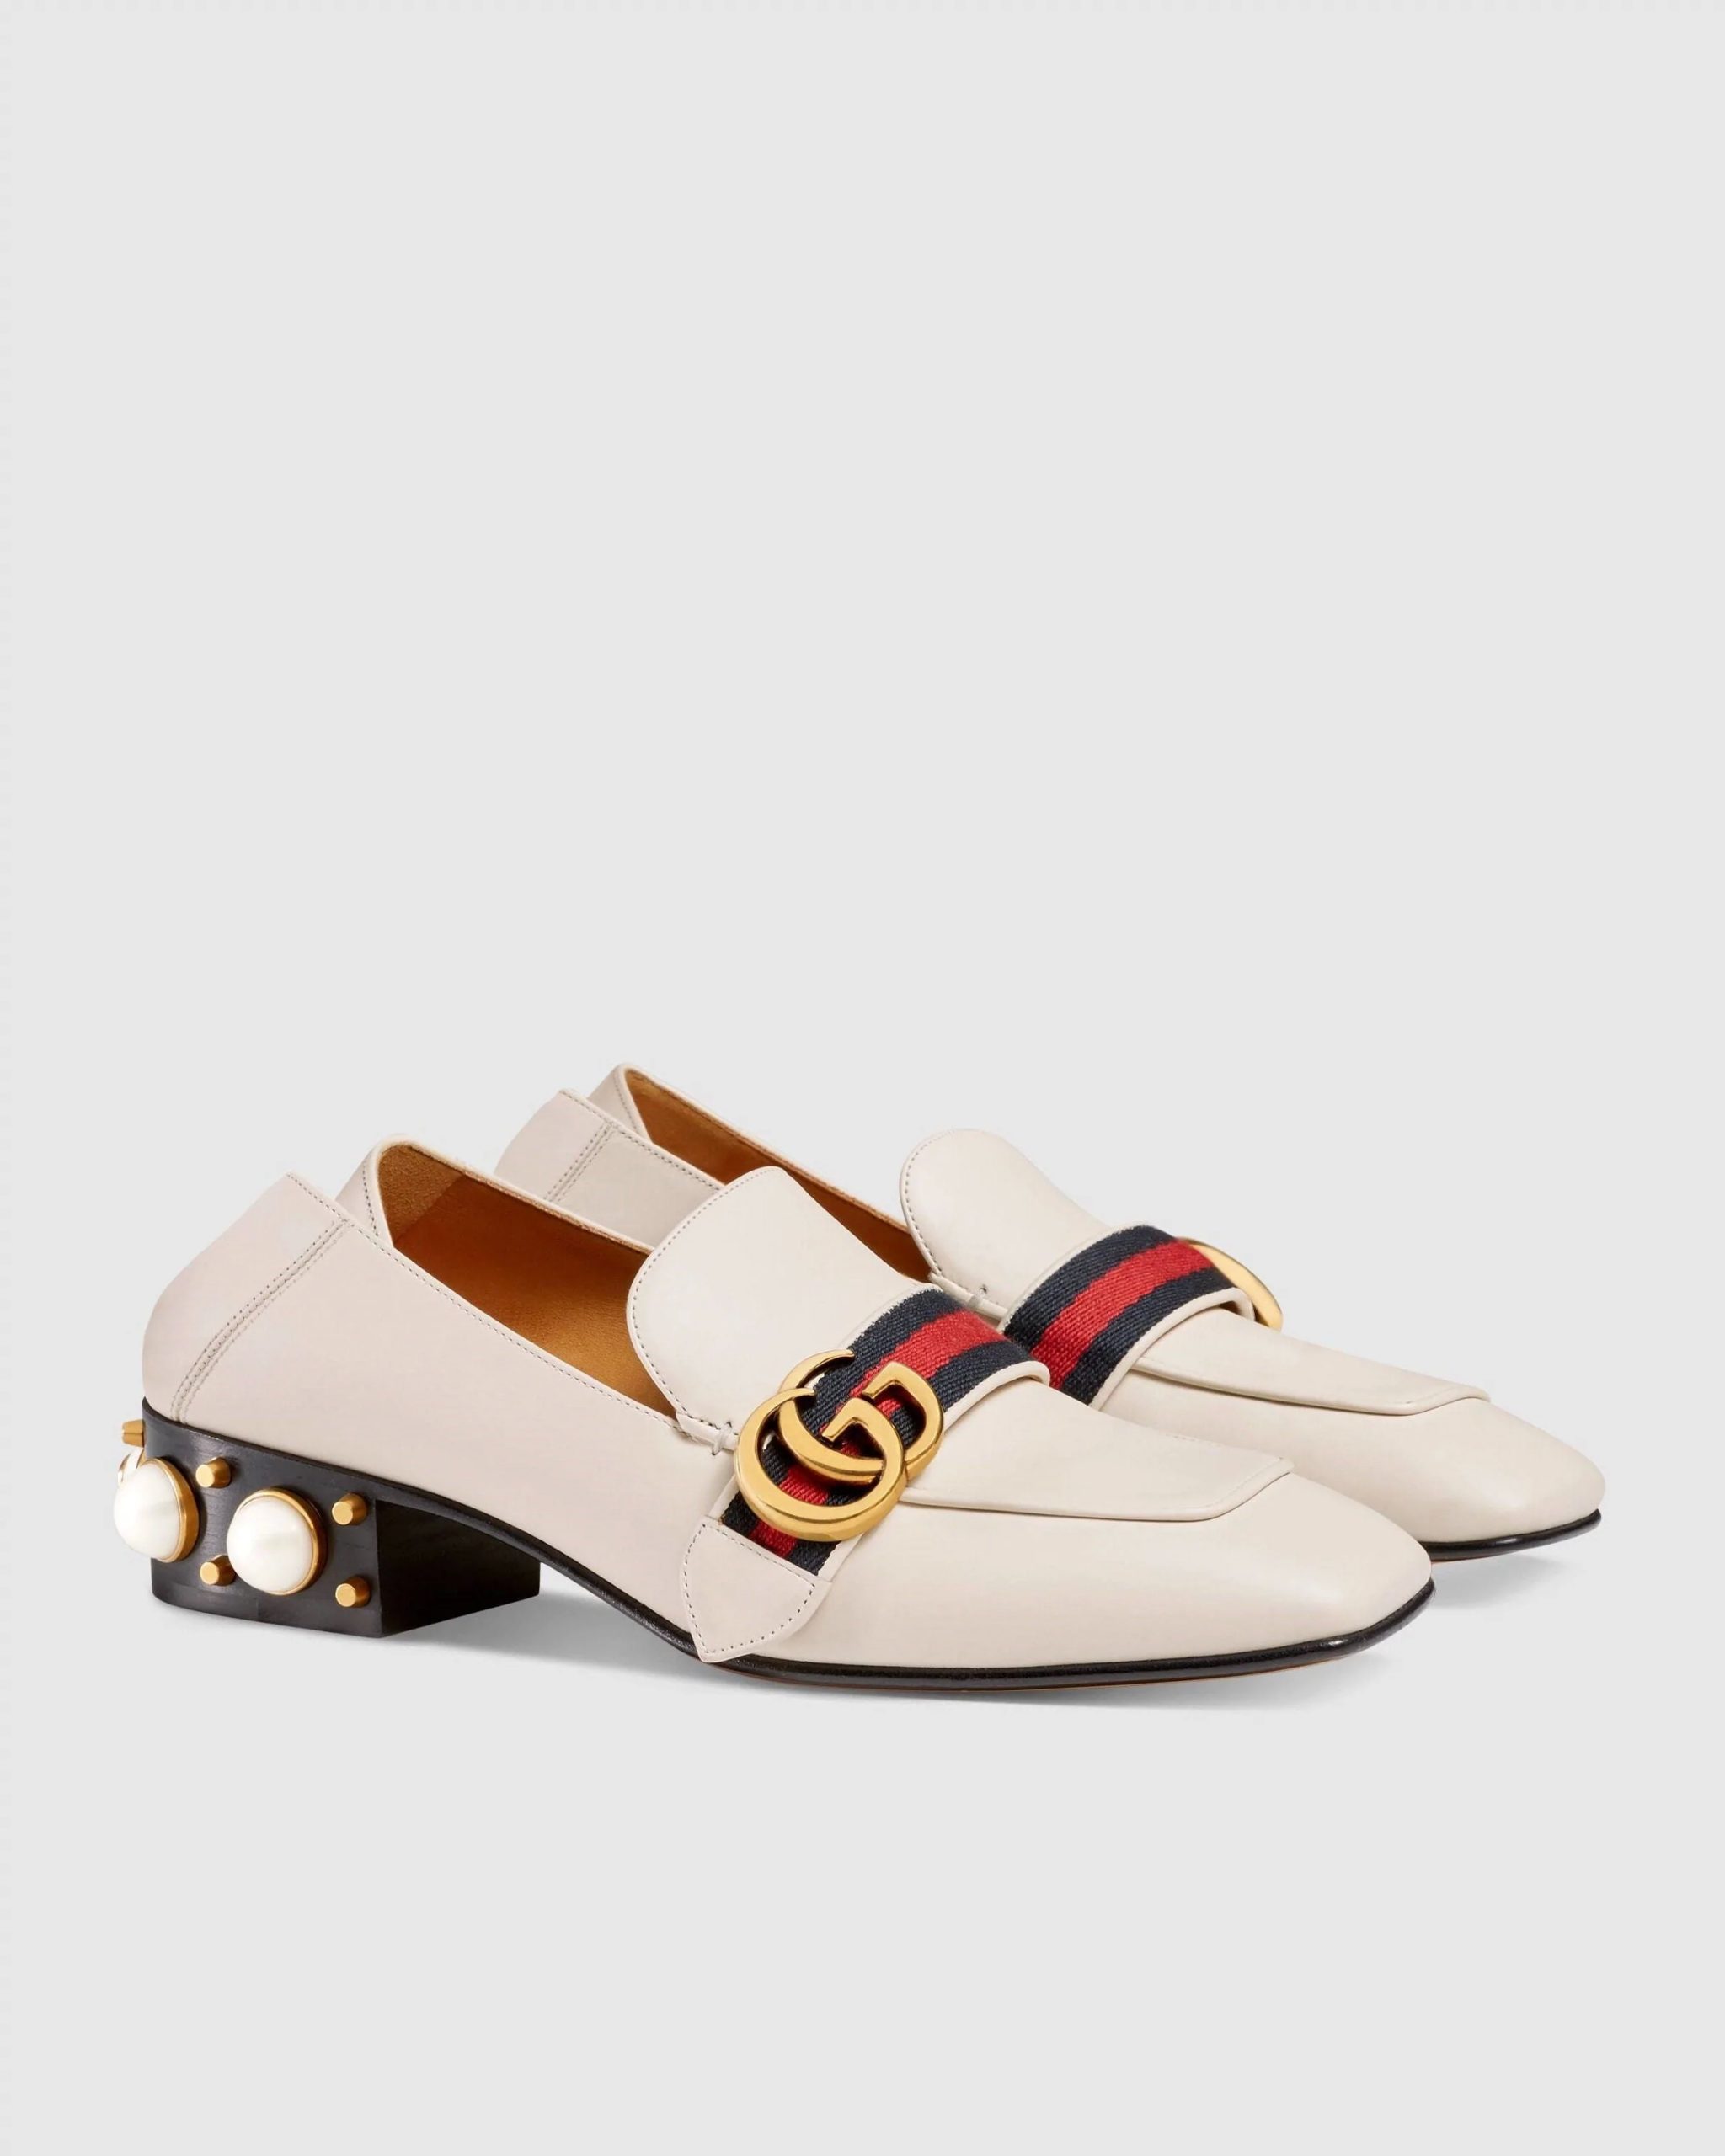 Gucci Leather Mid-Heel Loafer, White